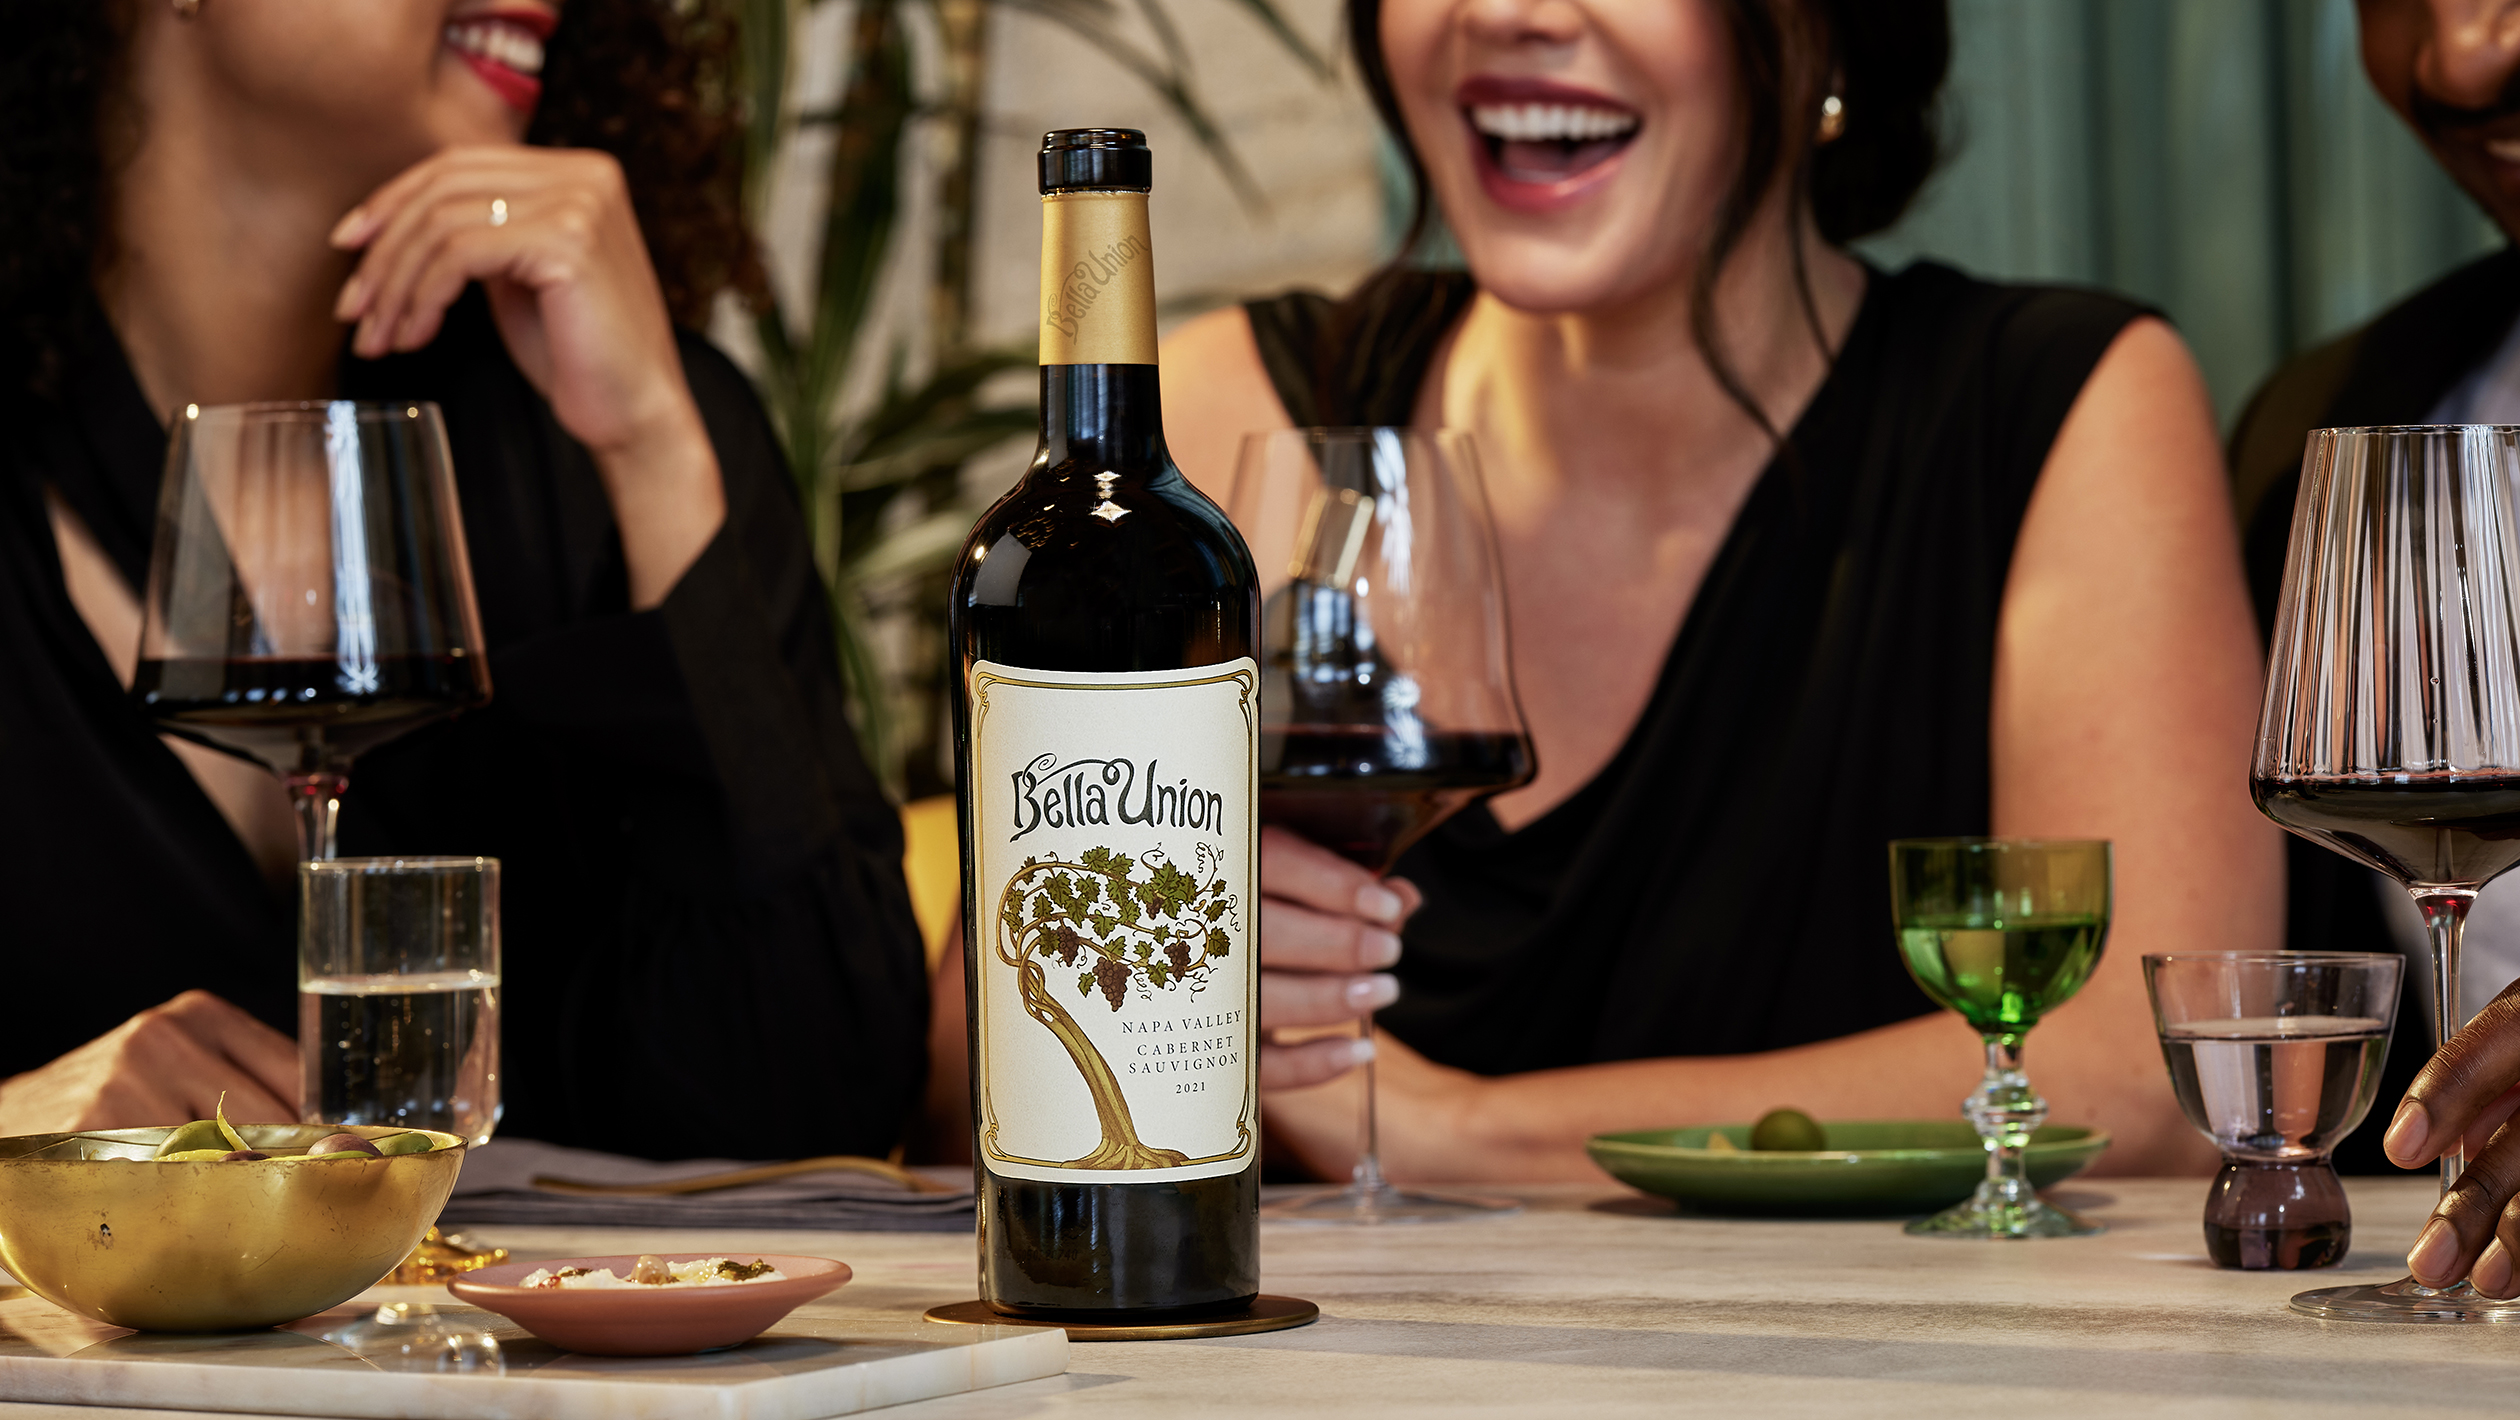 A bottle of Bella Union Cabarnet Sauvignon sits in the foreground of a table of excited wine drinkers